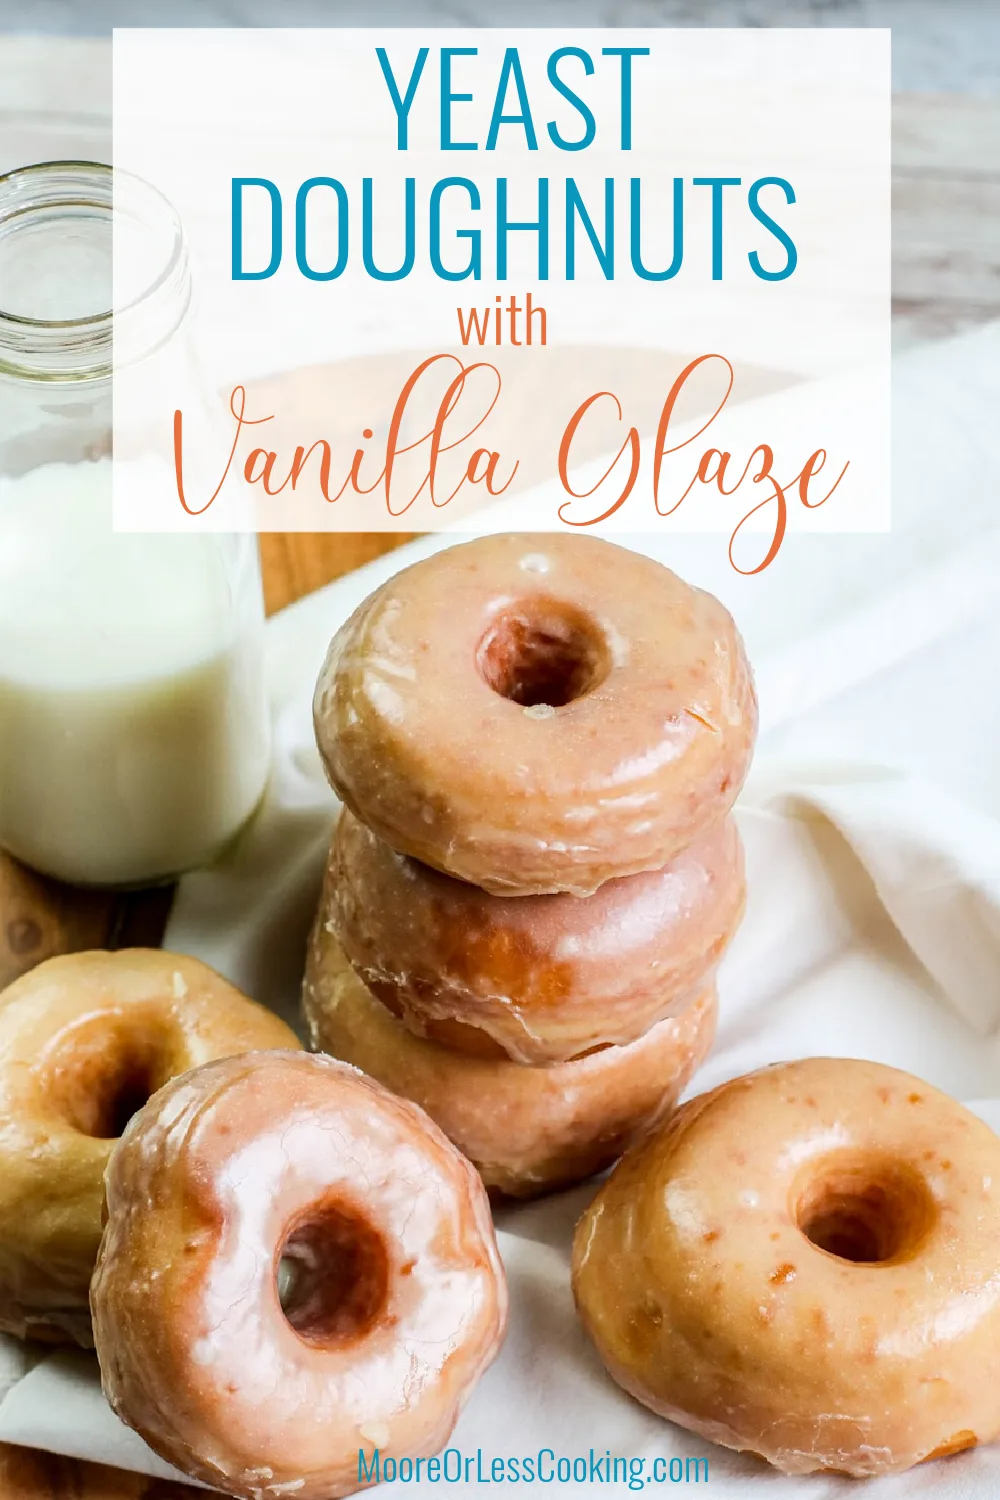 Soft, pillowy golden fried dough glazed to sweet perfection is the result of this homemade recipe for classic yeast doughnuts. Skip the bakery and make these yourself. You’ll be guaranteed freshness and a swoon-worthy sugary glazed treat. via @Mooreorlesscook